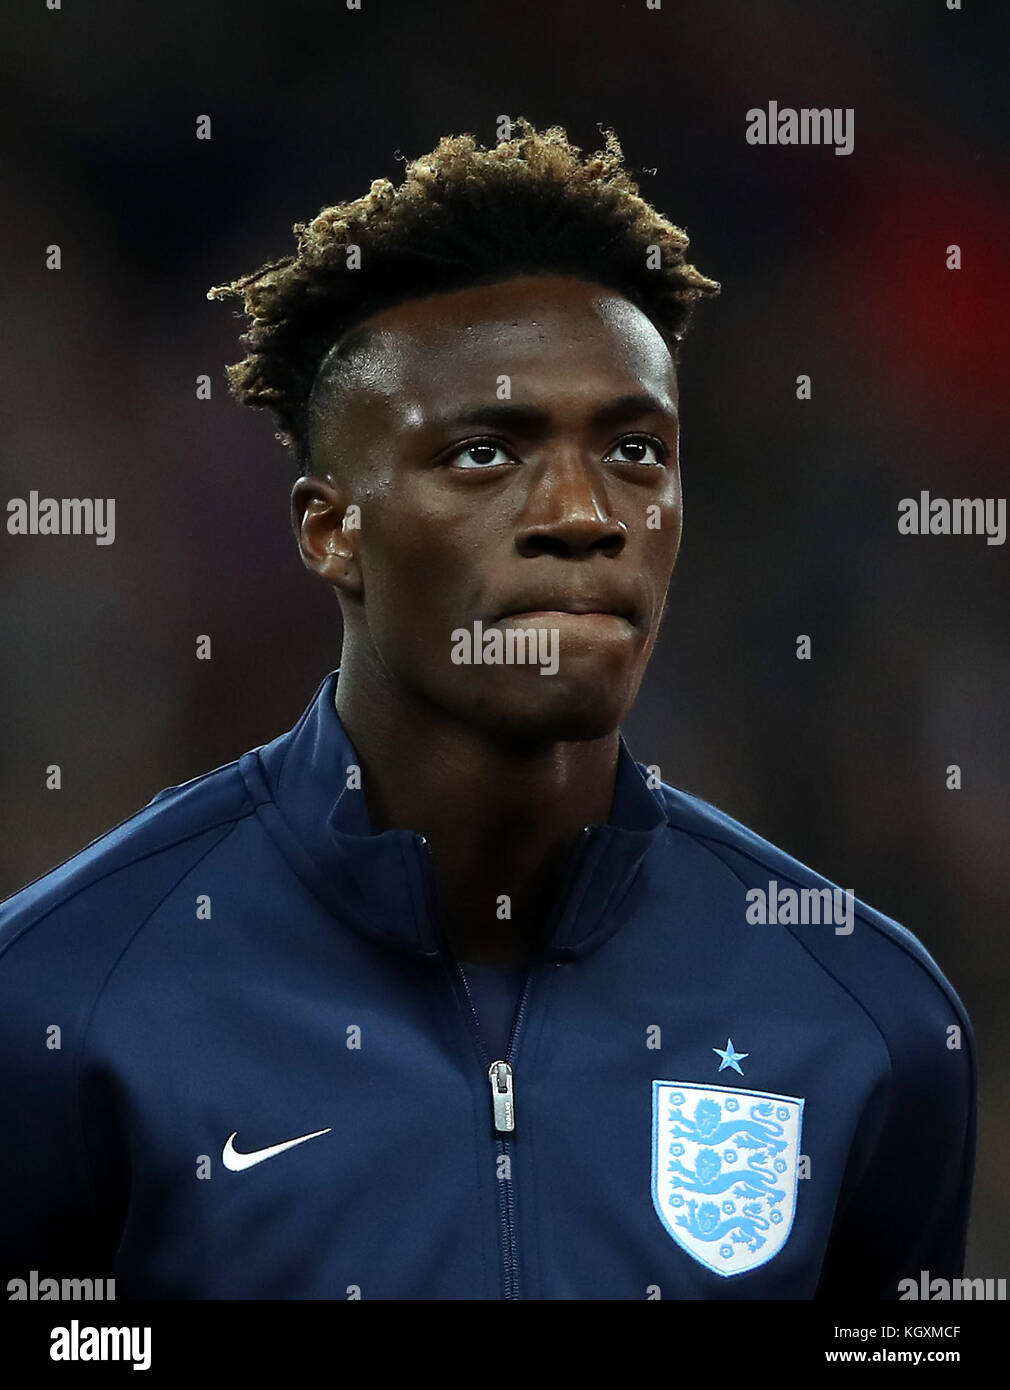 England's Tammy Abraham during the International Friendly match at Wembley Stadium, London. PRESS ASSOCIATION Photo. Picture date: Friday November 10, 2017. See PA story SOCCER England. Photo credit should read: Nick Potts/PA Wire. Stock Photo